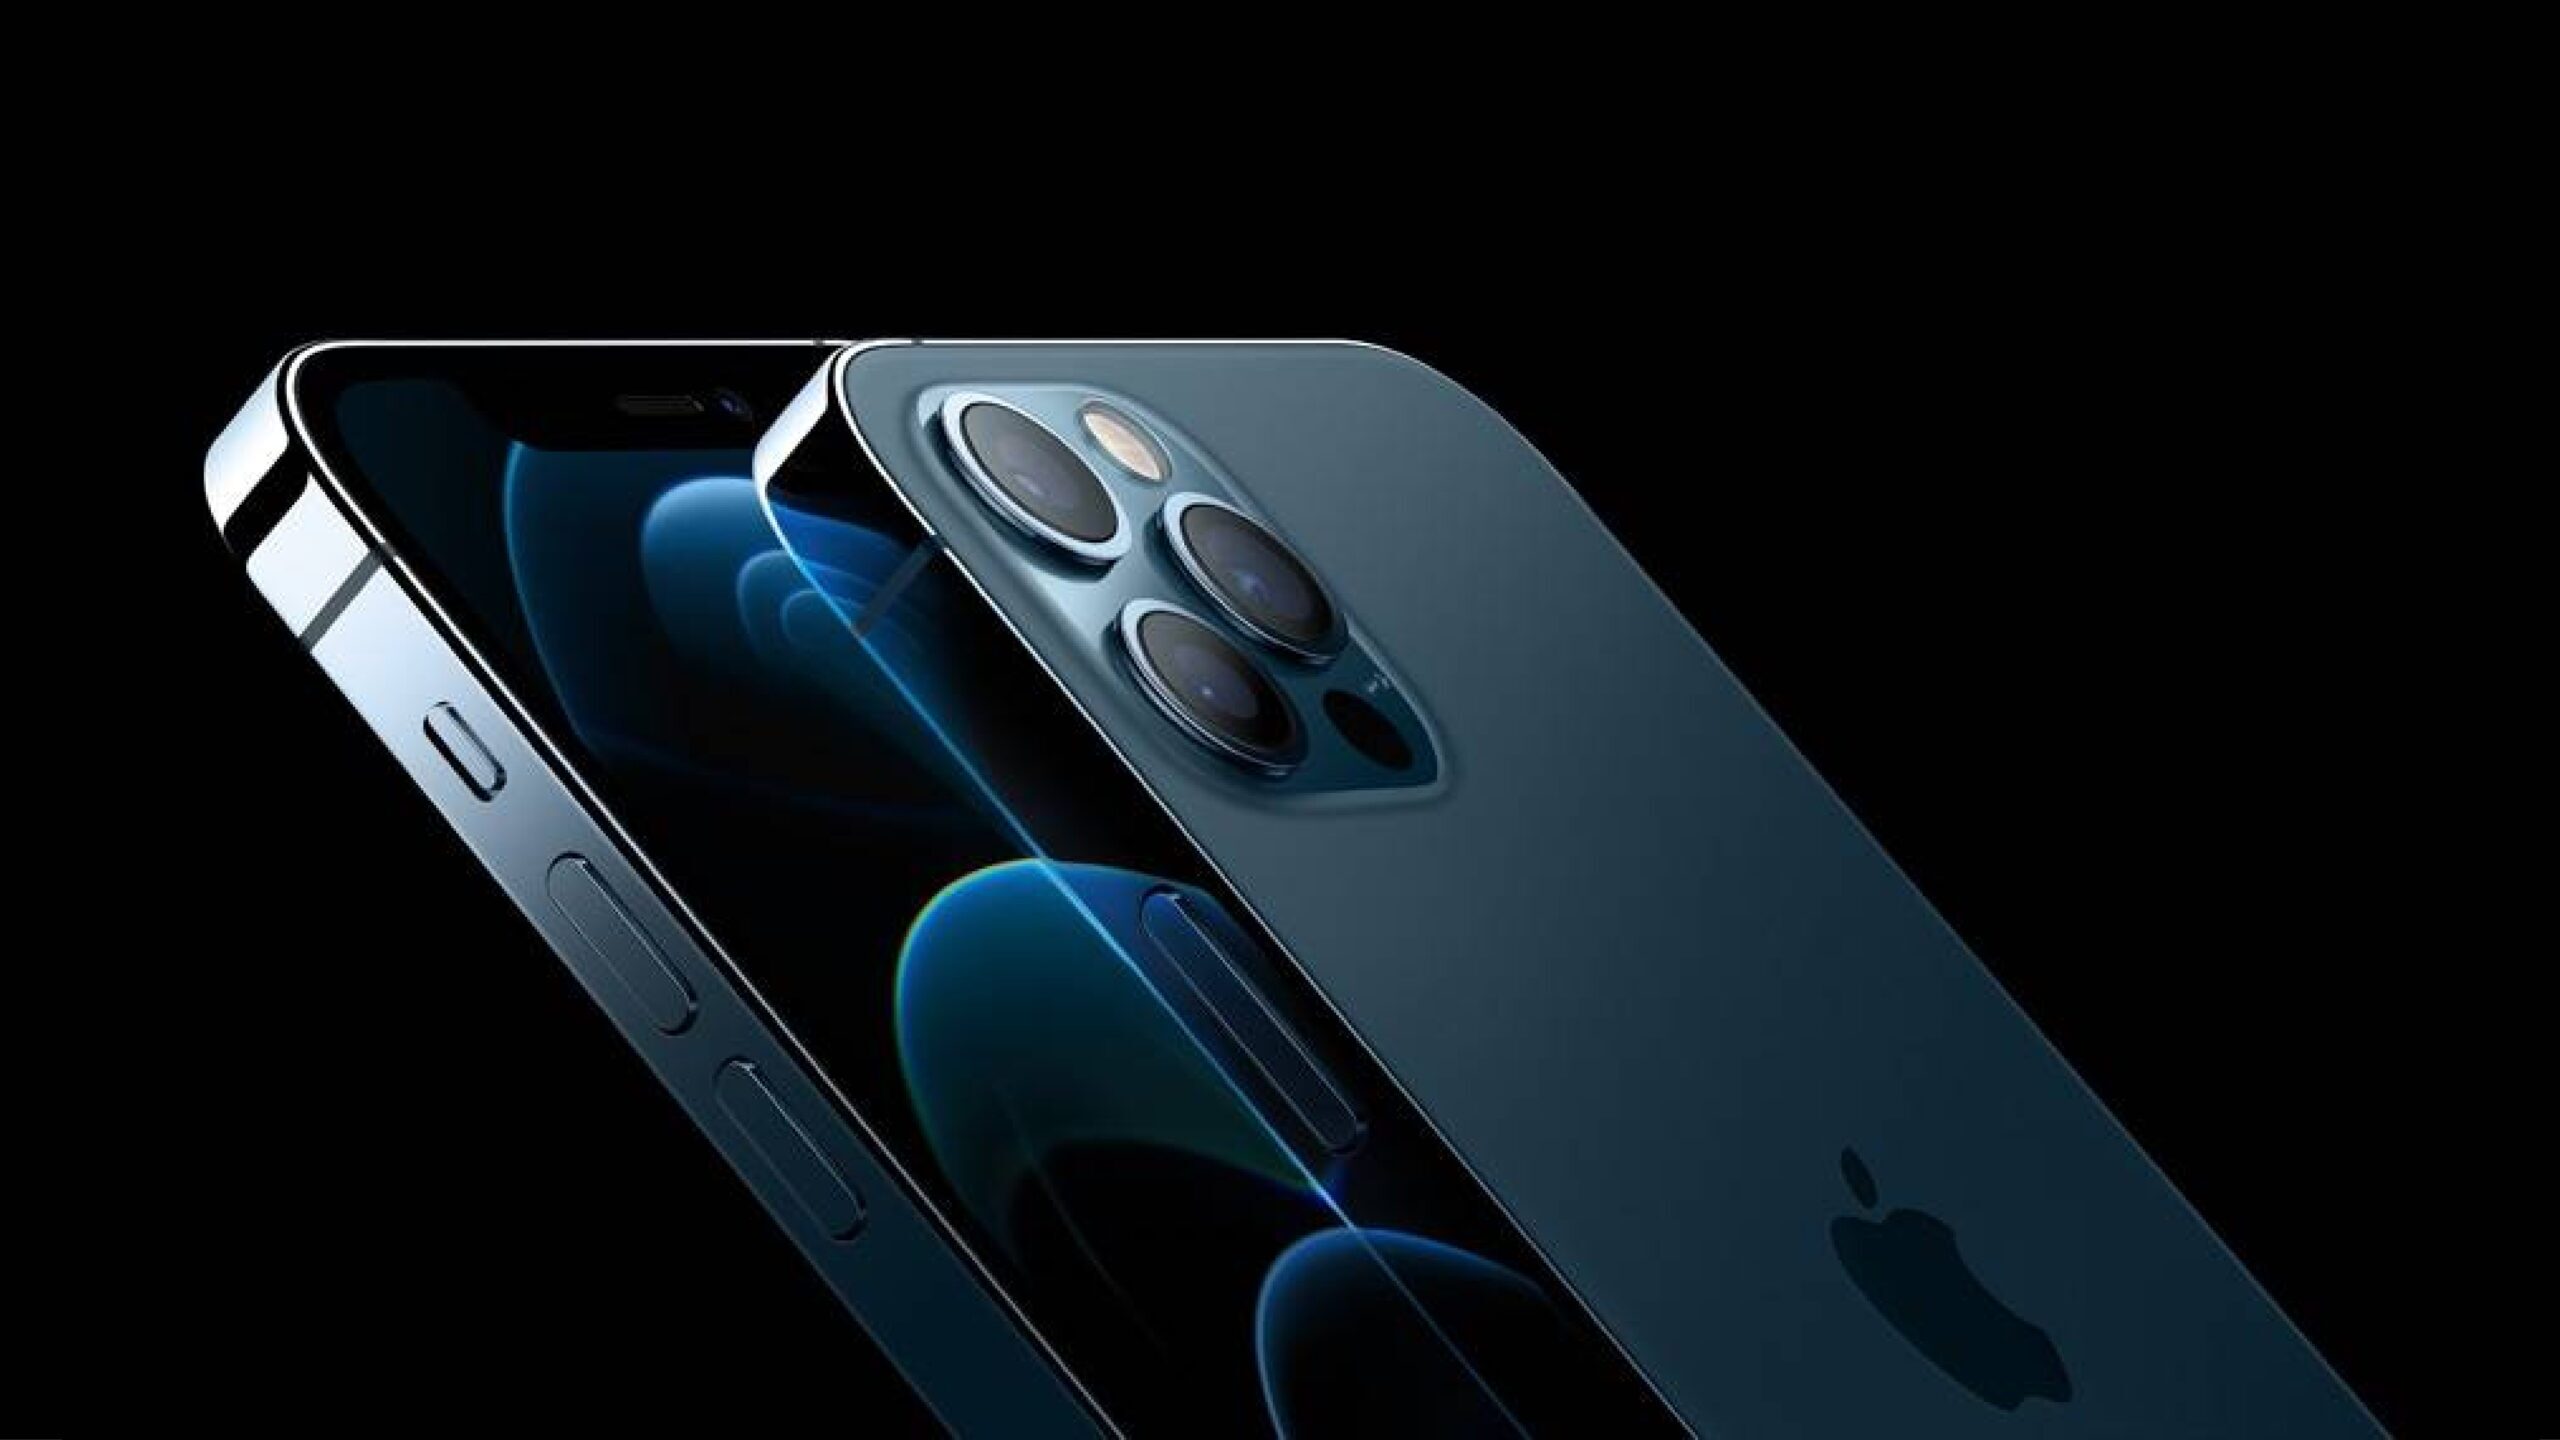 _ Stunning new iPhone 13 Pro renders show a brand new color supposedly coming this year